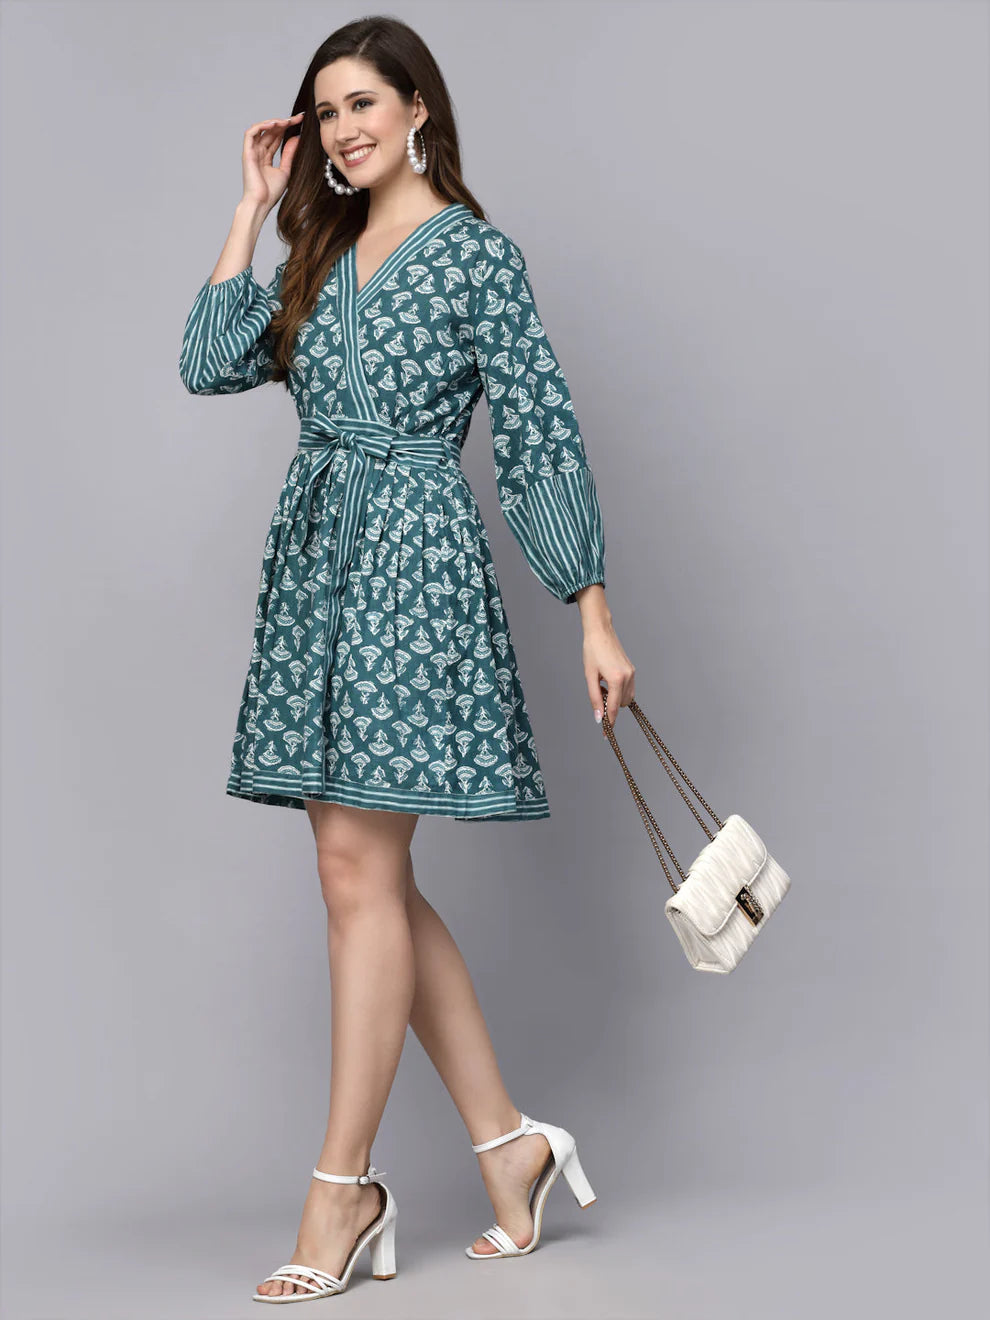 Printed, front tied bluish-green dress